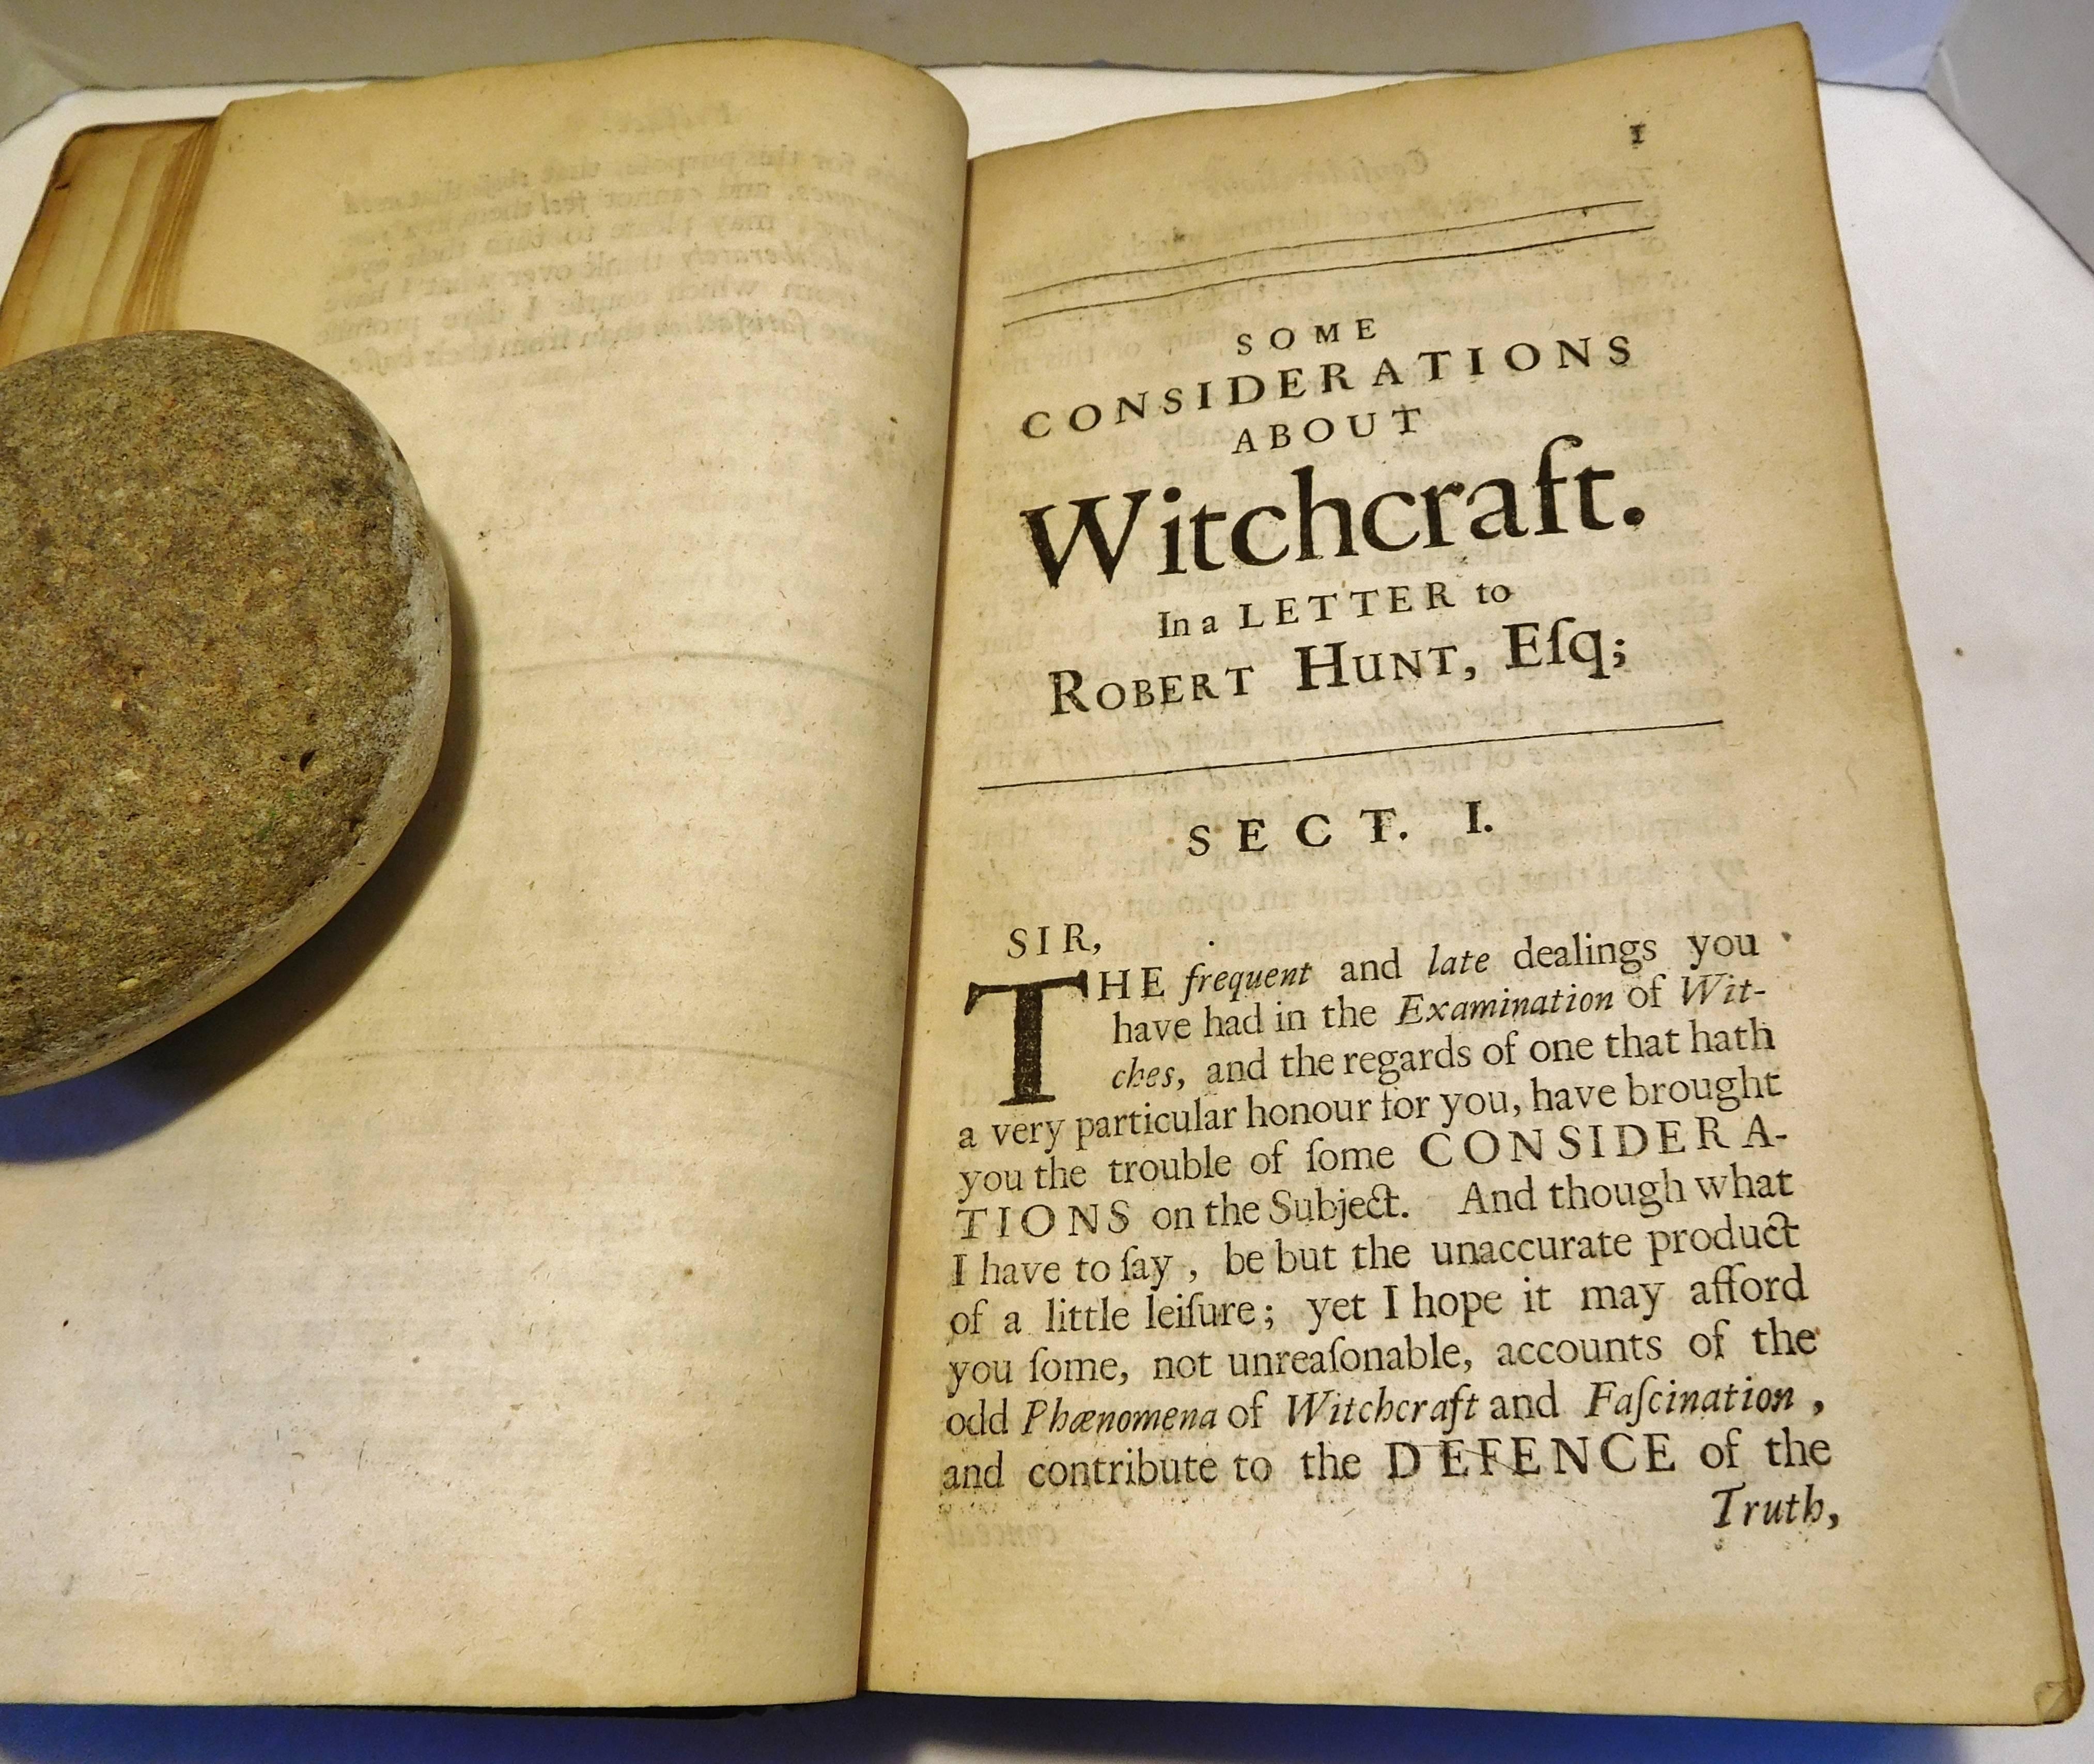 British Glanvil's Book on the Real Existence of Witches, 